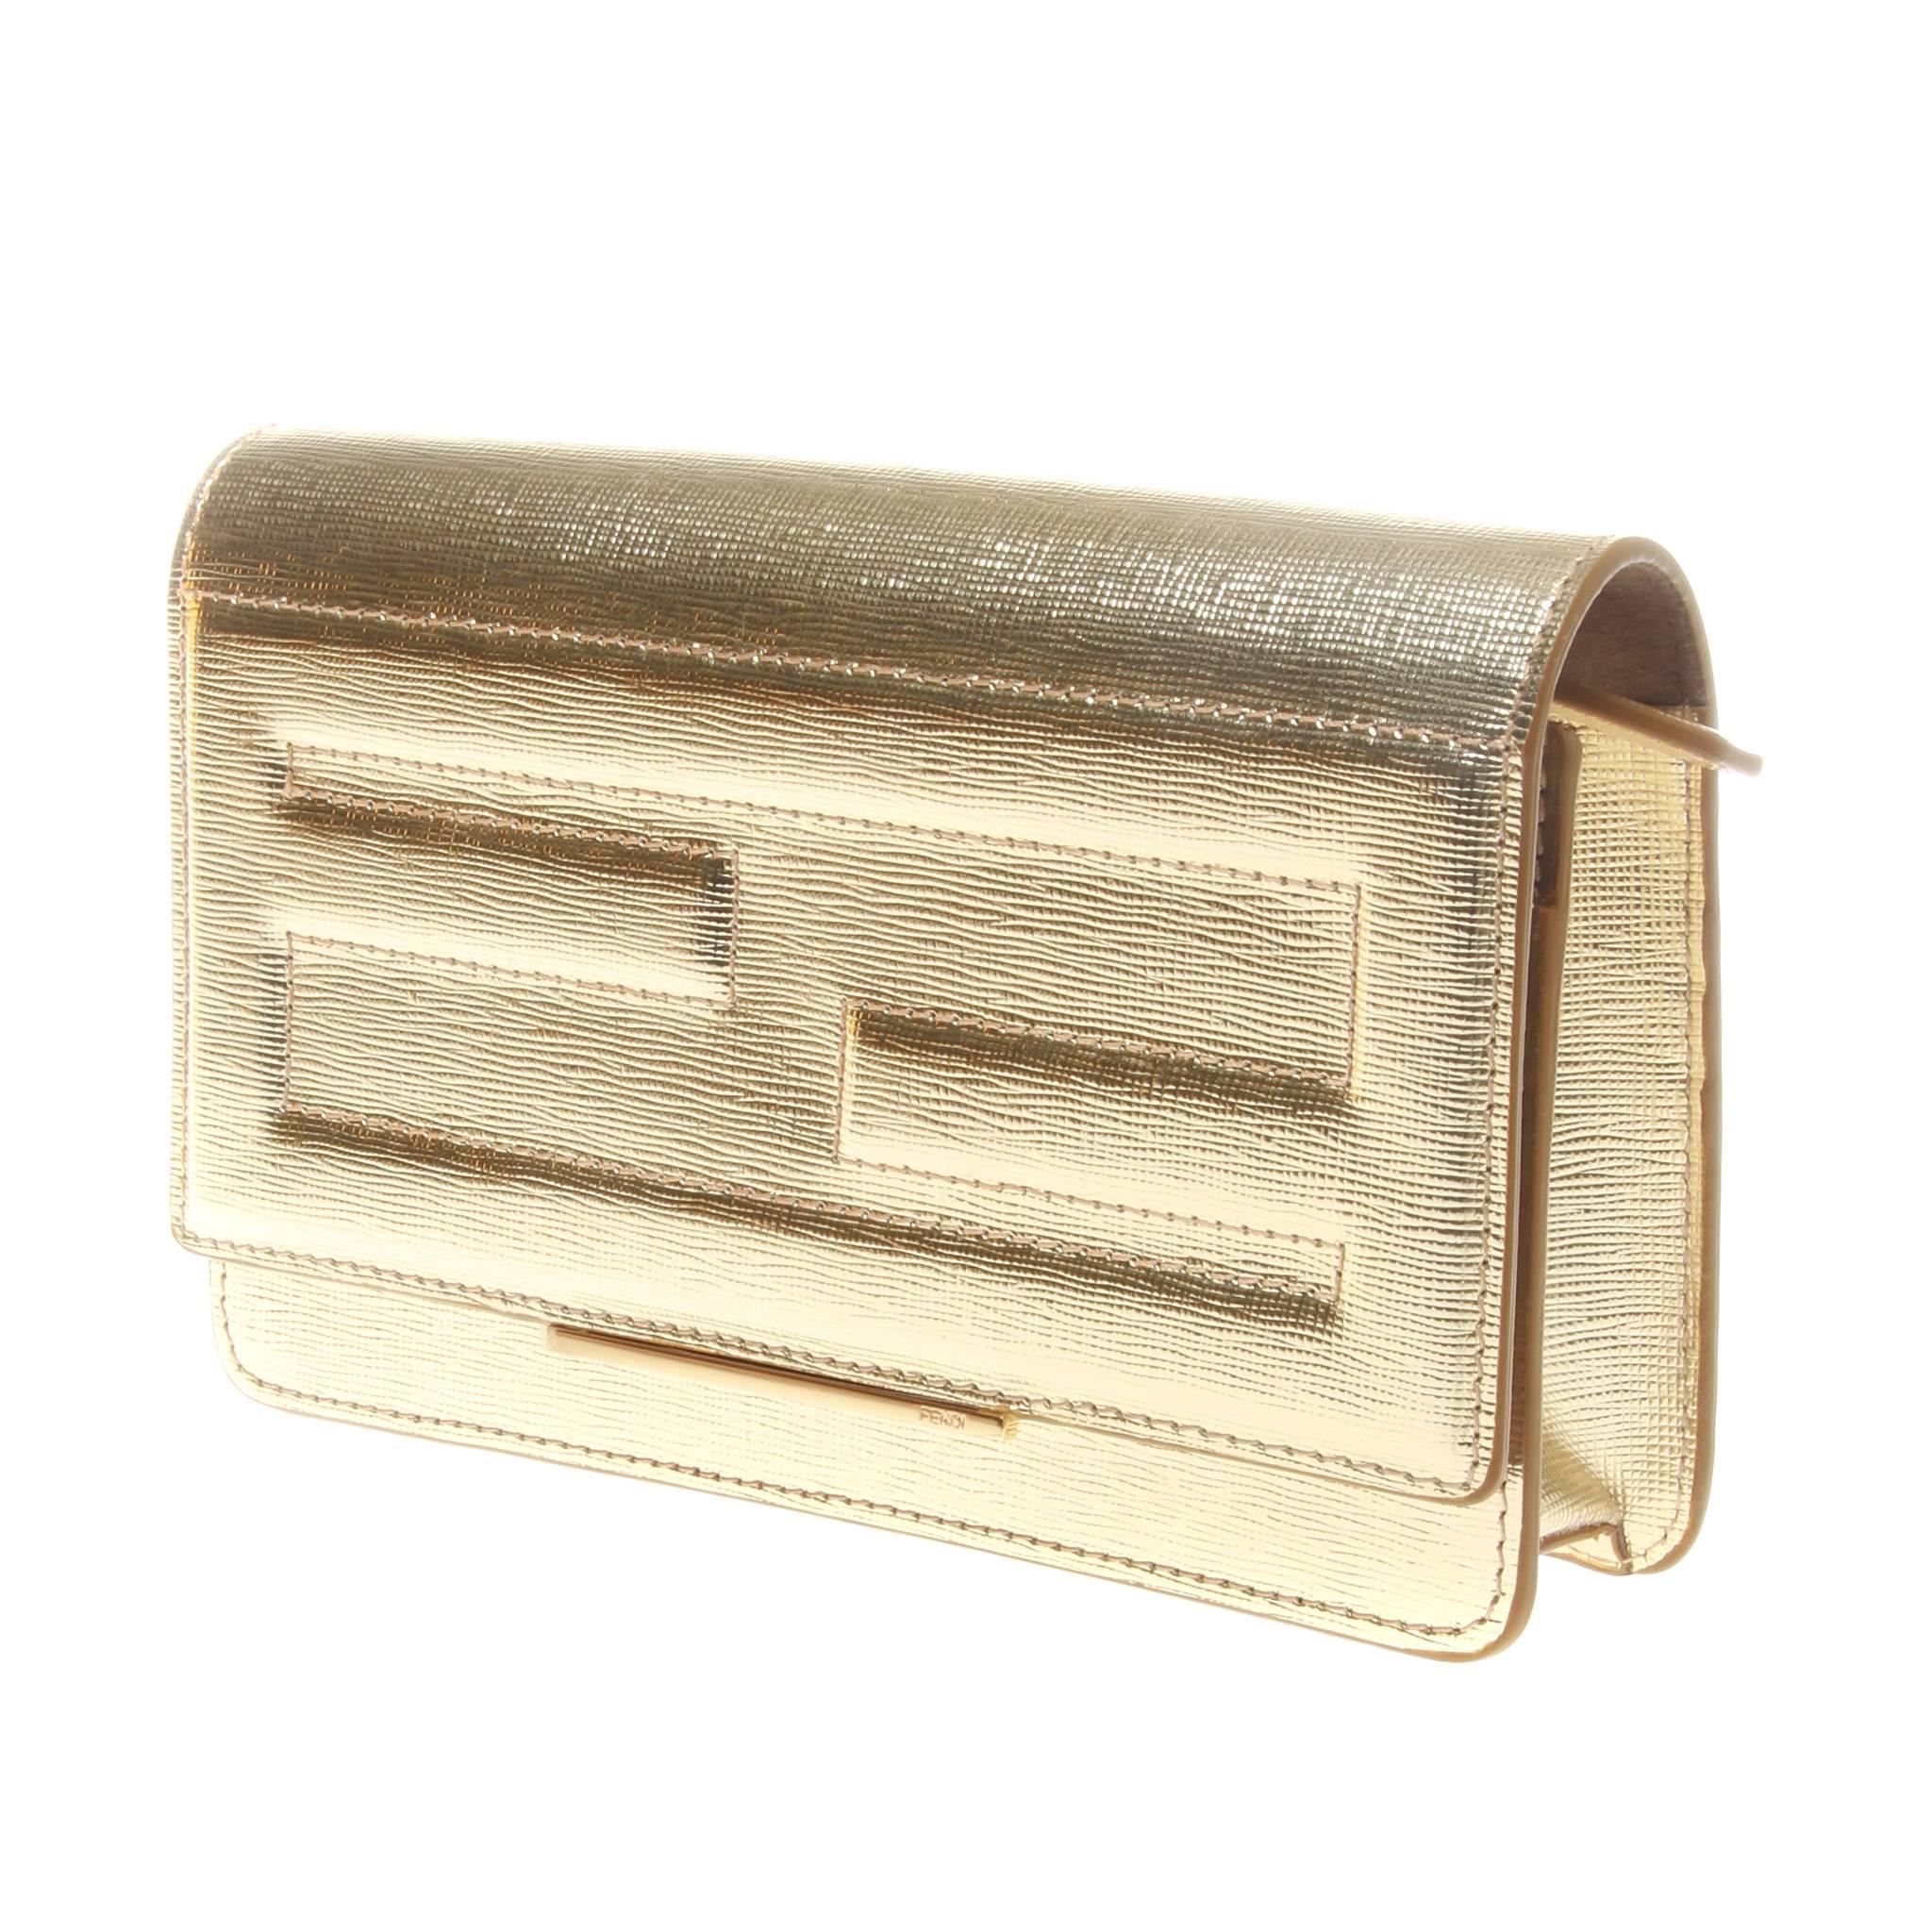 Fendi gold metallic calfskin wallet on chain (WOC). Tube design featuring FF stitching to front flap. 

The interior has handy gusseted compartments, flat pockets and six credit card slots.
Long detachable chain shoulder strap and gold metal ware.